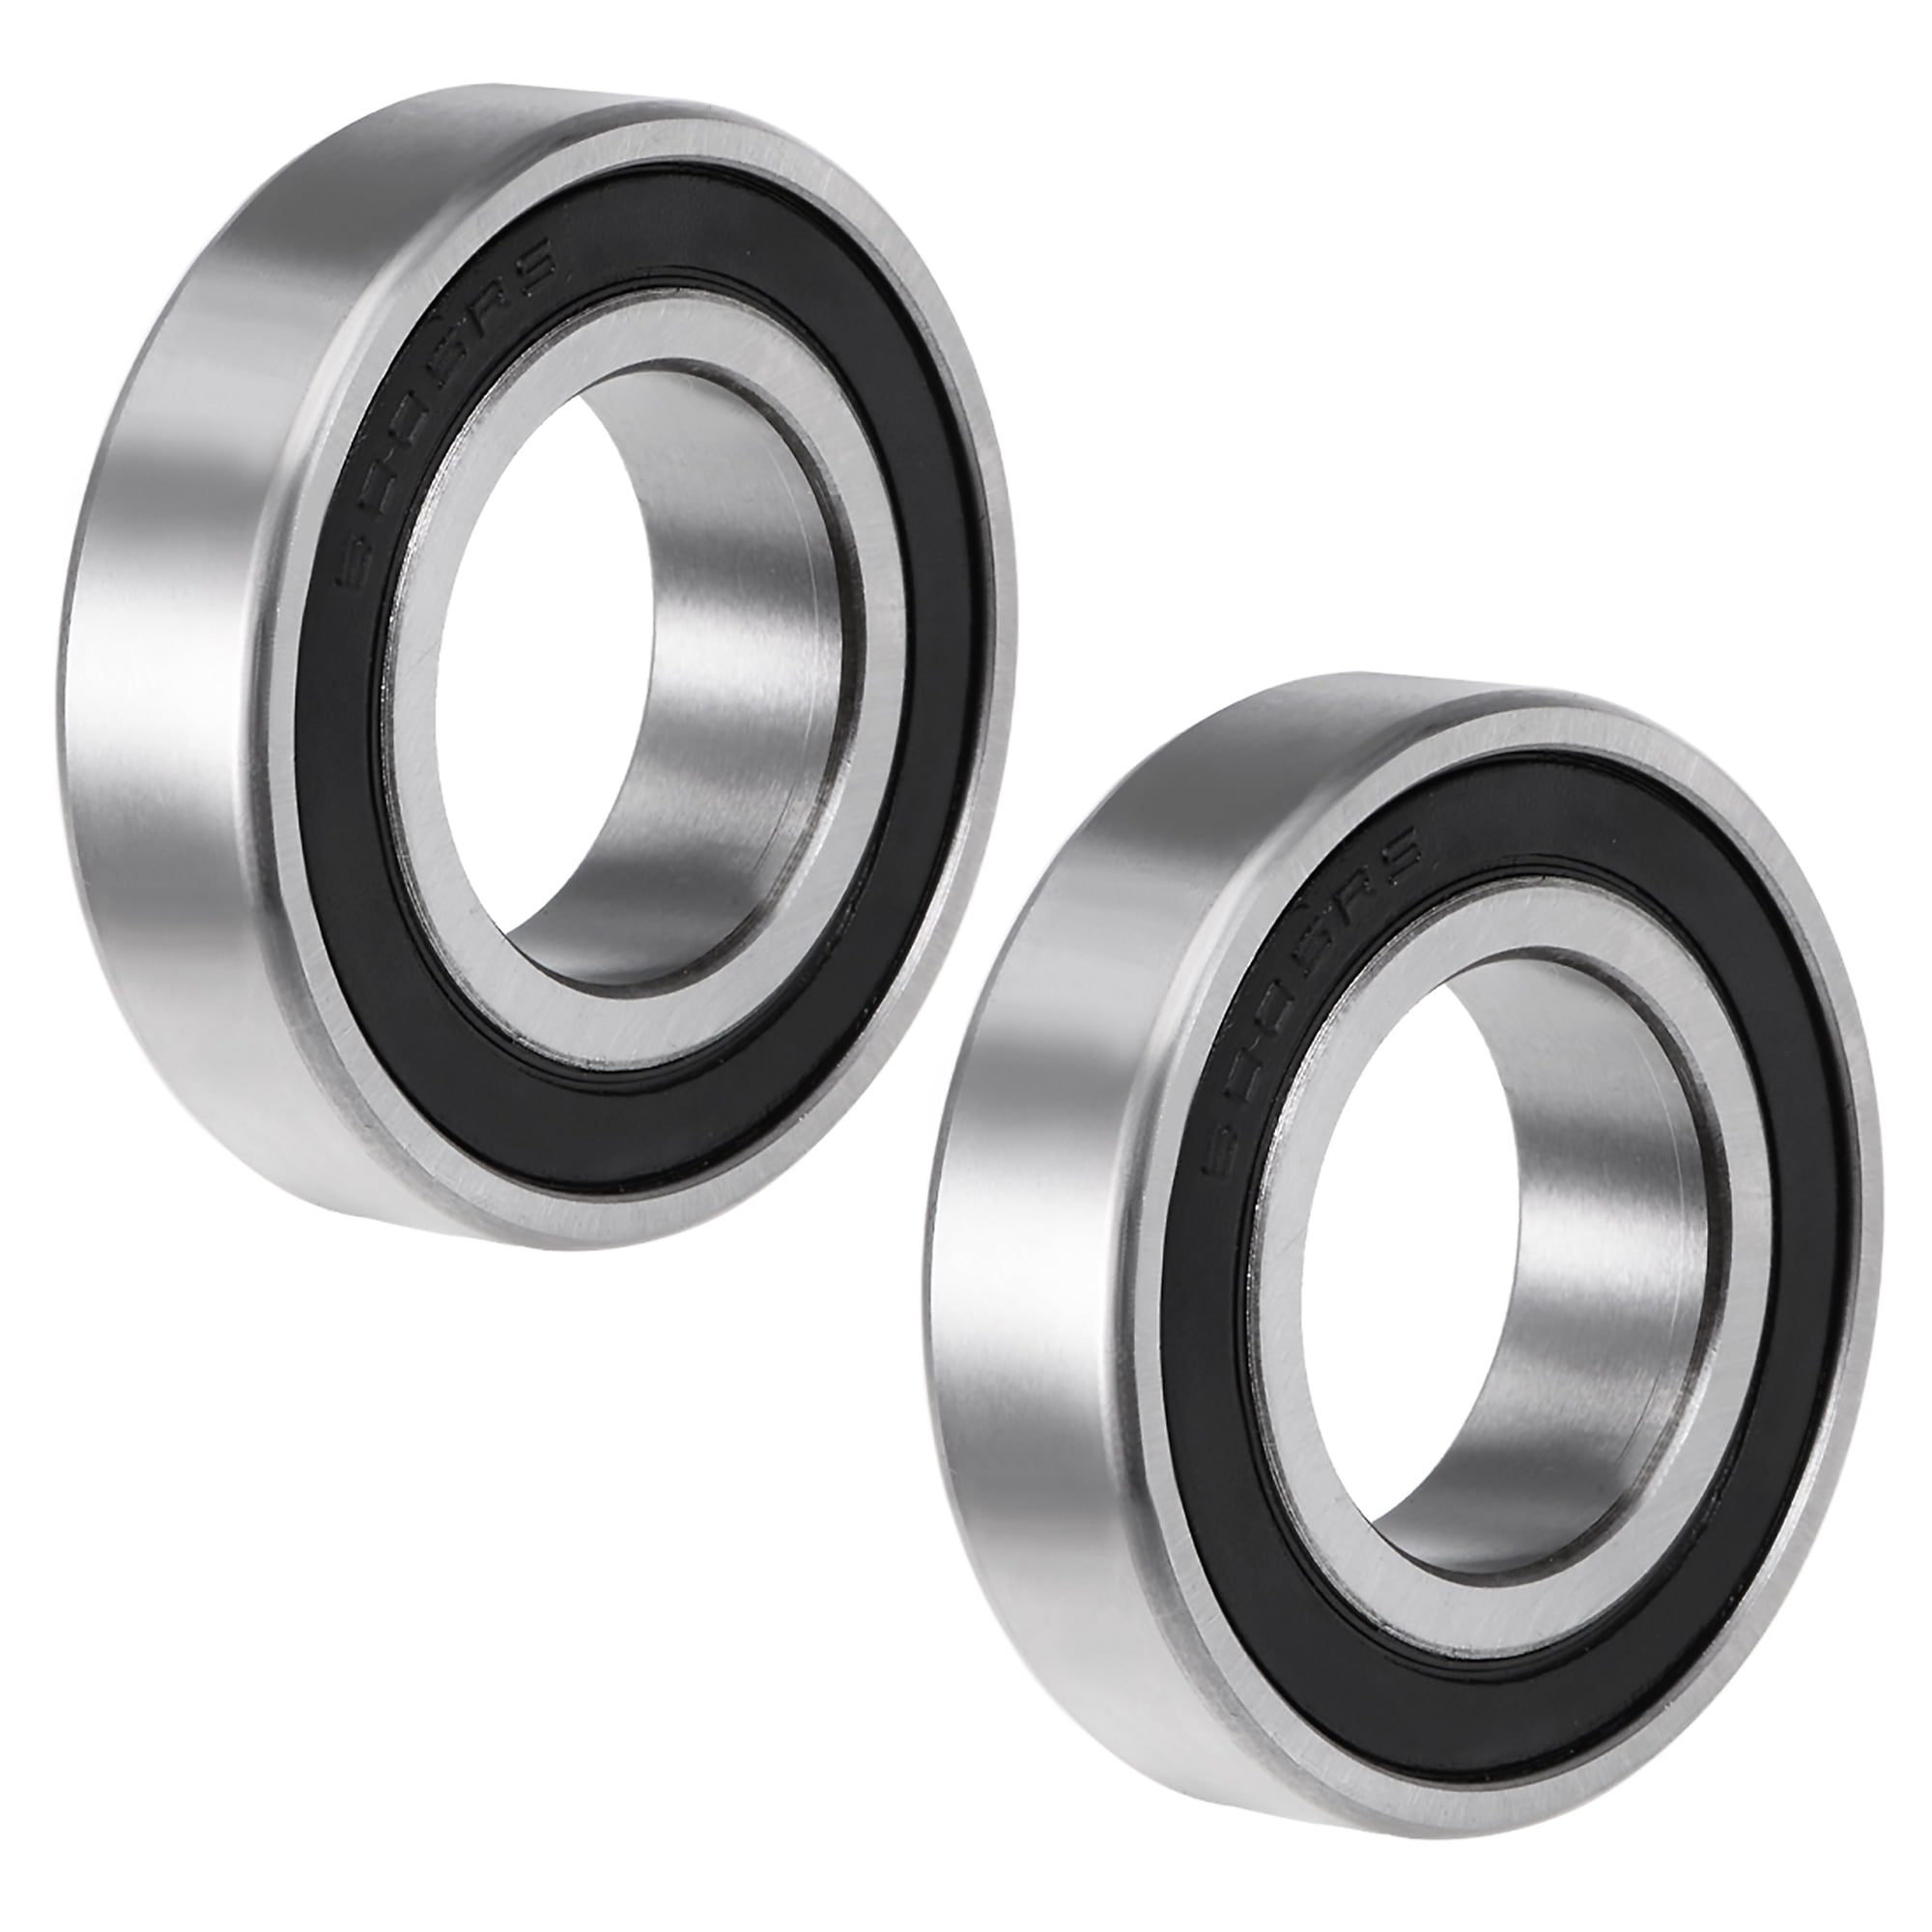 6005-2RS Deep Groove Ball Bearings 25x47x12mm Chrome Sealed Double Sealed Bearings 1 Package 